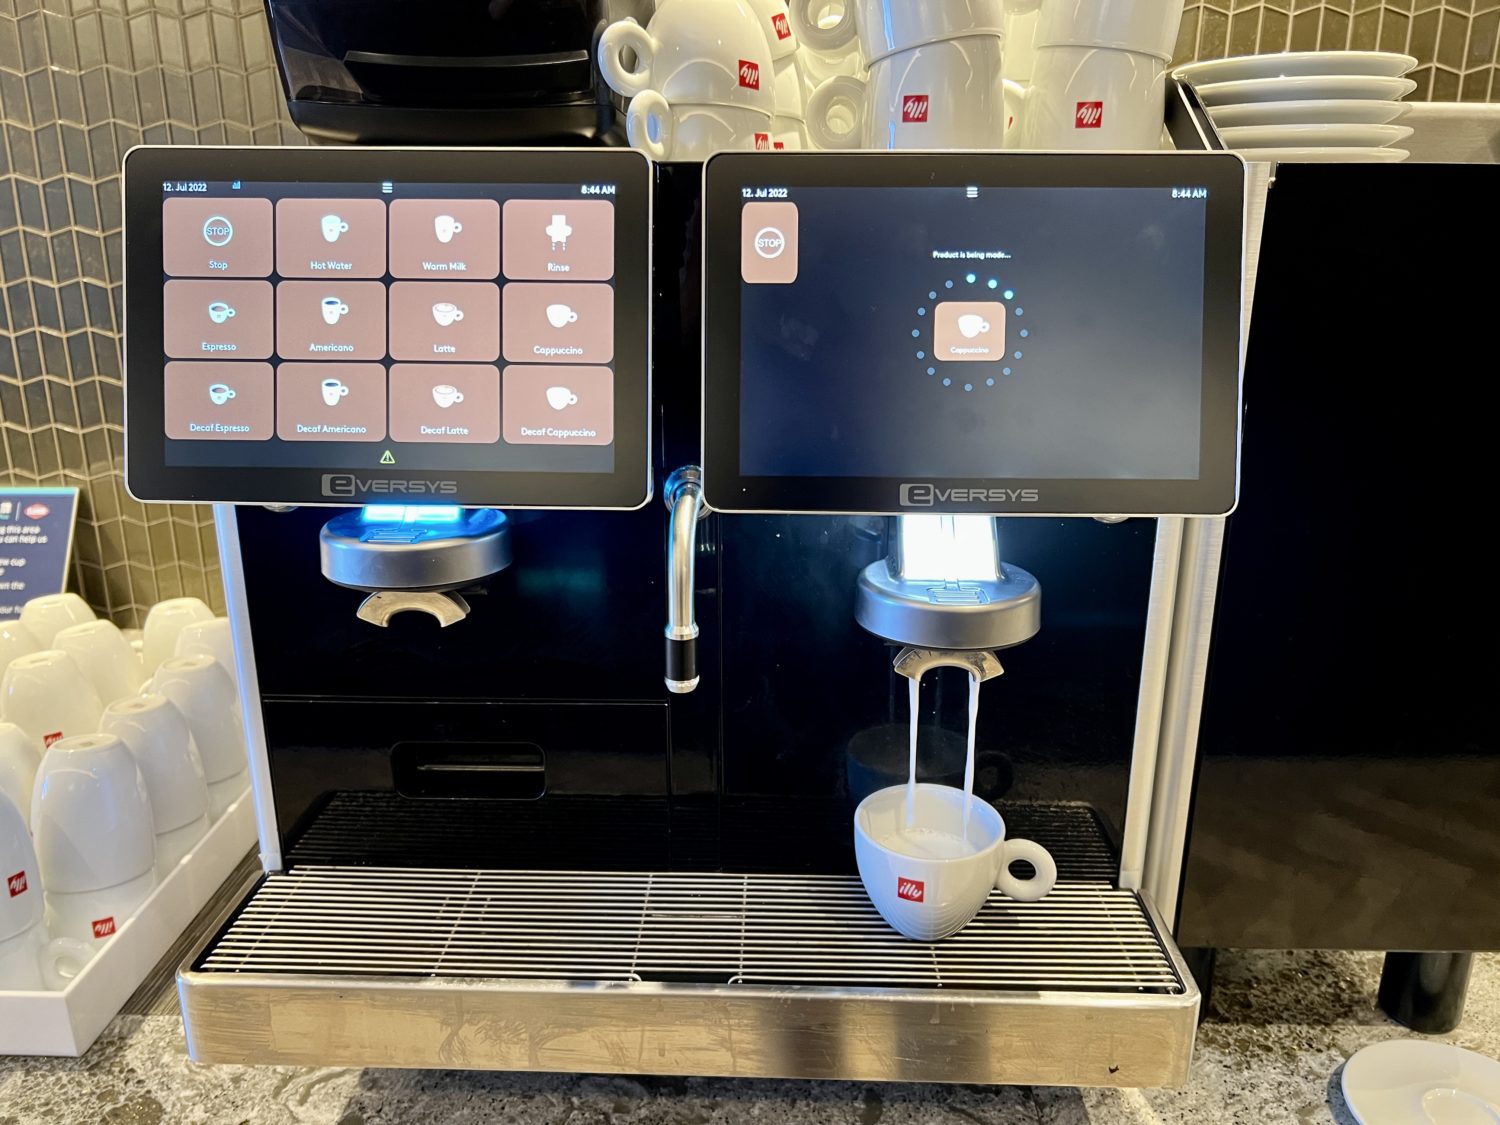 coffee machine united polaris lounge chicago  Beautiful But Busy: United Polaris Lounge Chicago-O&#039;Hare (ORD) Review – Thrifty Traveler &#8211; Thrifty Traveler united polaris lounge chicago coffee scaled